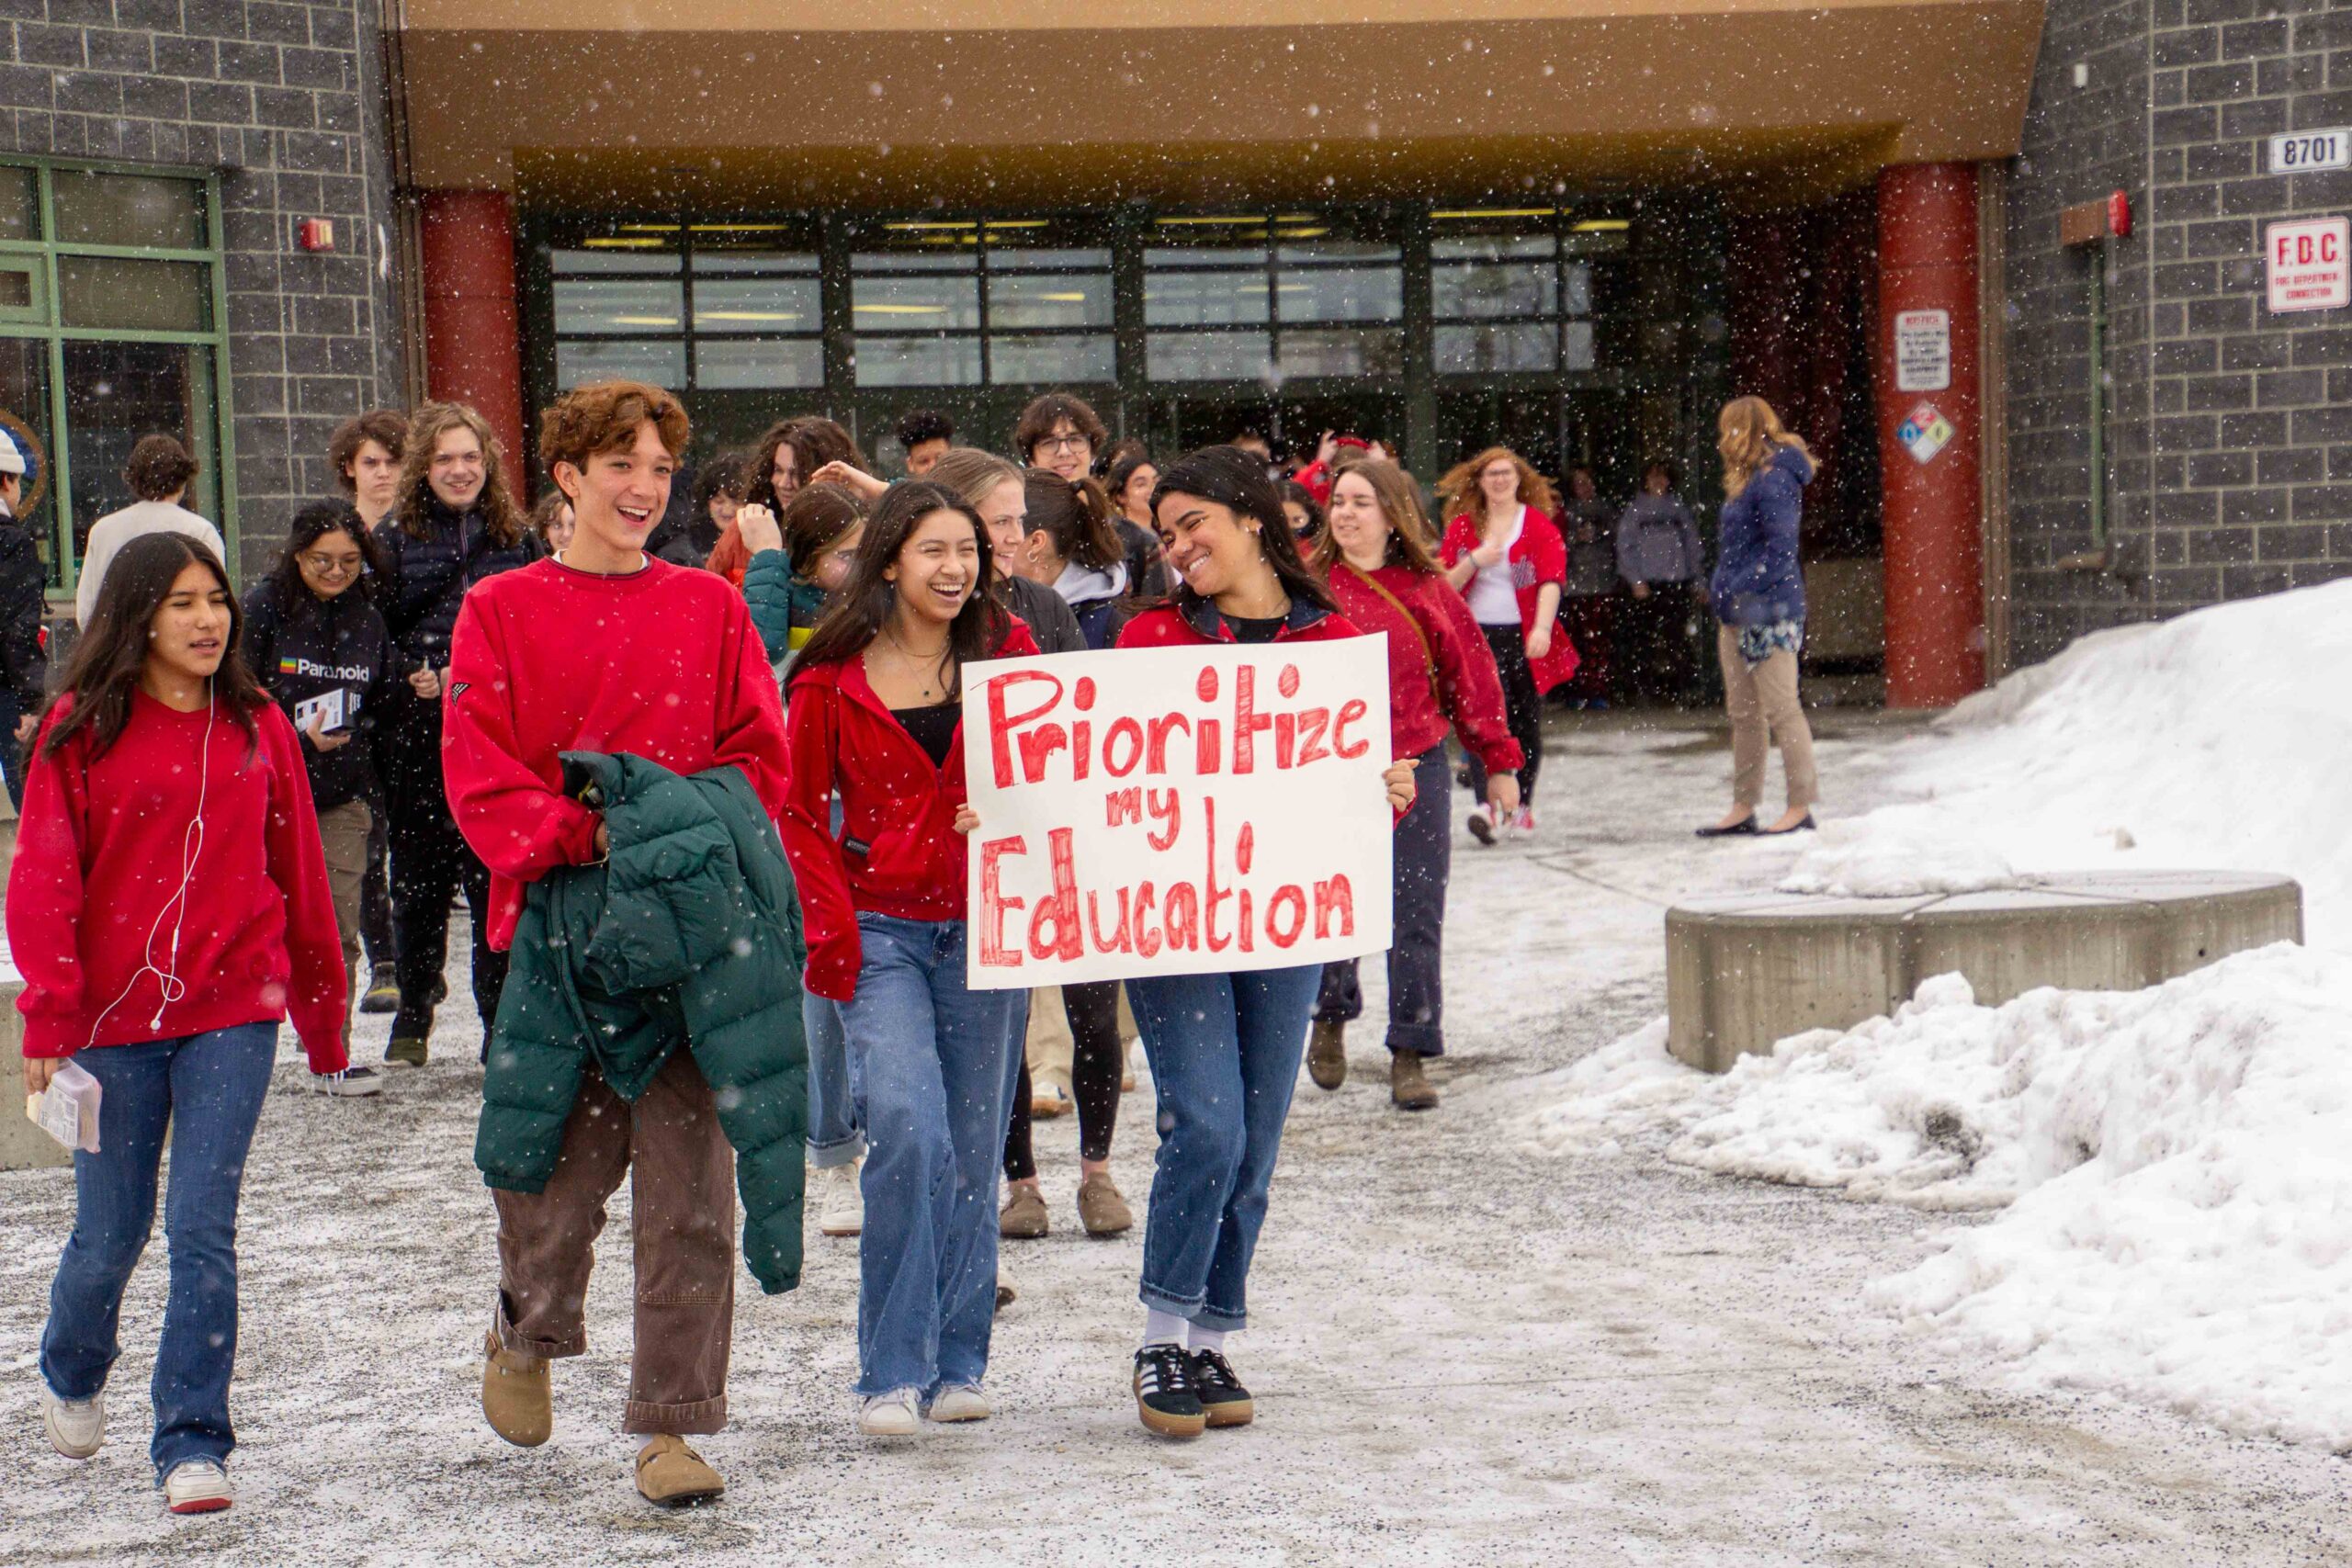 A group of students walking of their school wearing red and holding a sign that reads, "Prioritize my Education."